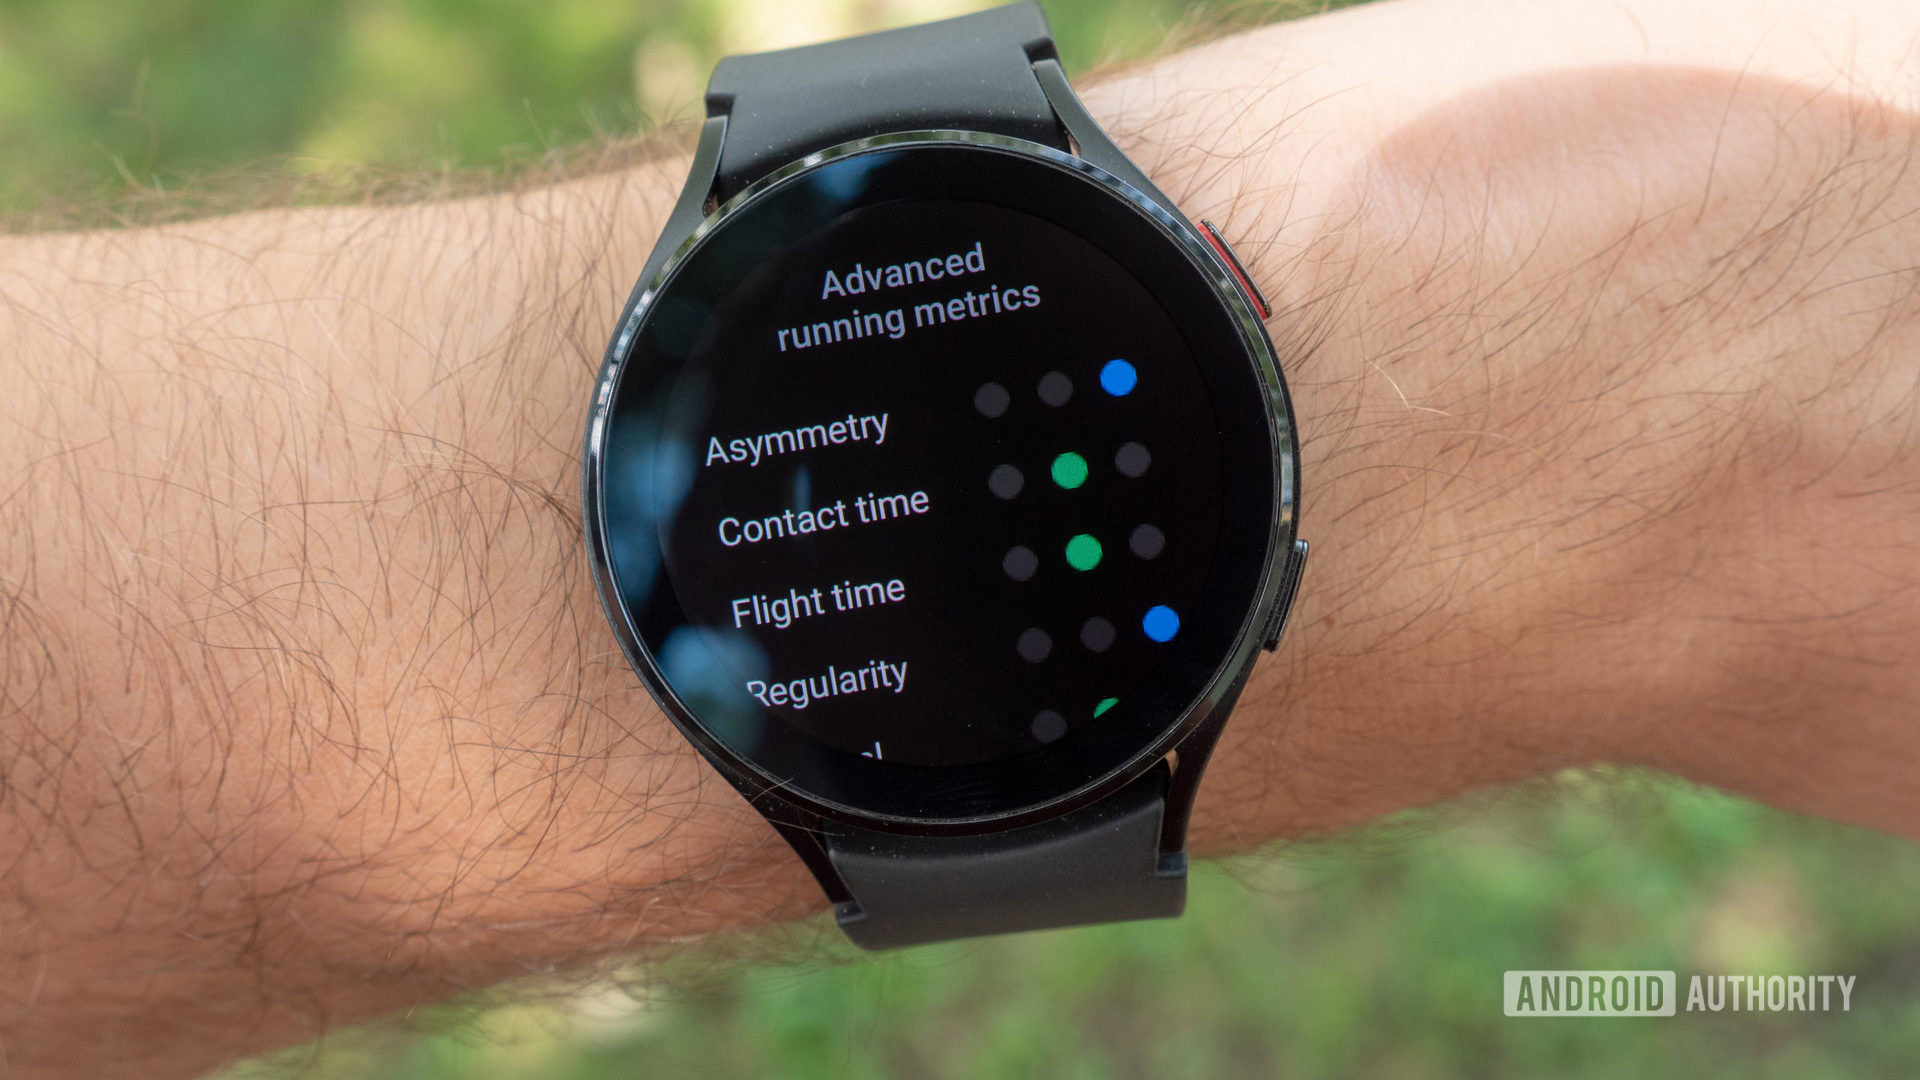 https://www.androidauthority.com/wp-content/uploads/2021/08/samsung-galaxy-watch-4-review-advanced-running-metrics-scaled.jpg